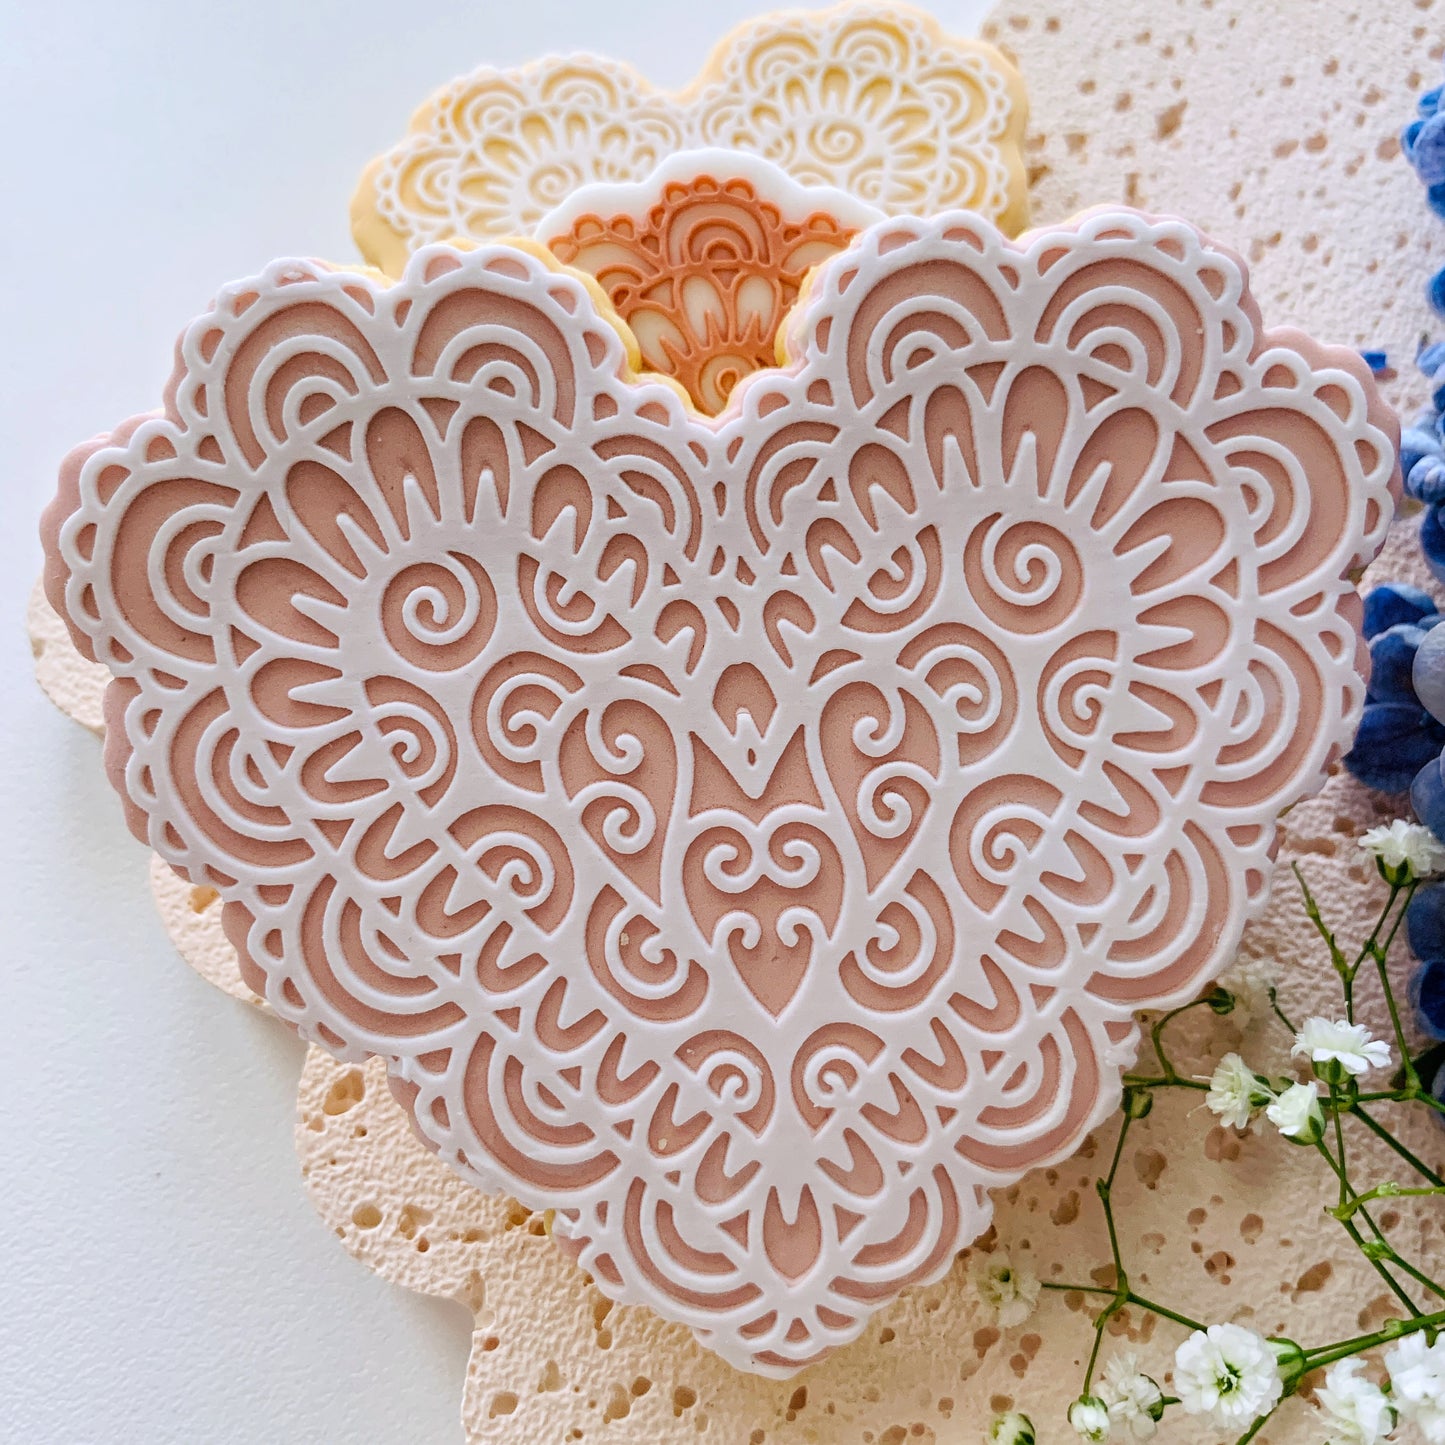 Large Lacey Heart Cookie Stamp & Cutter